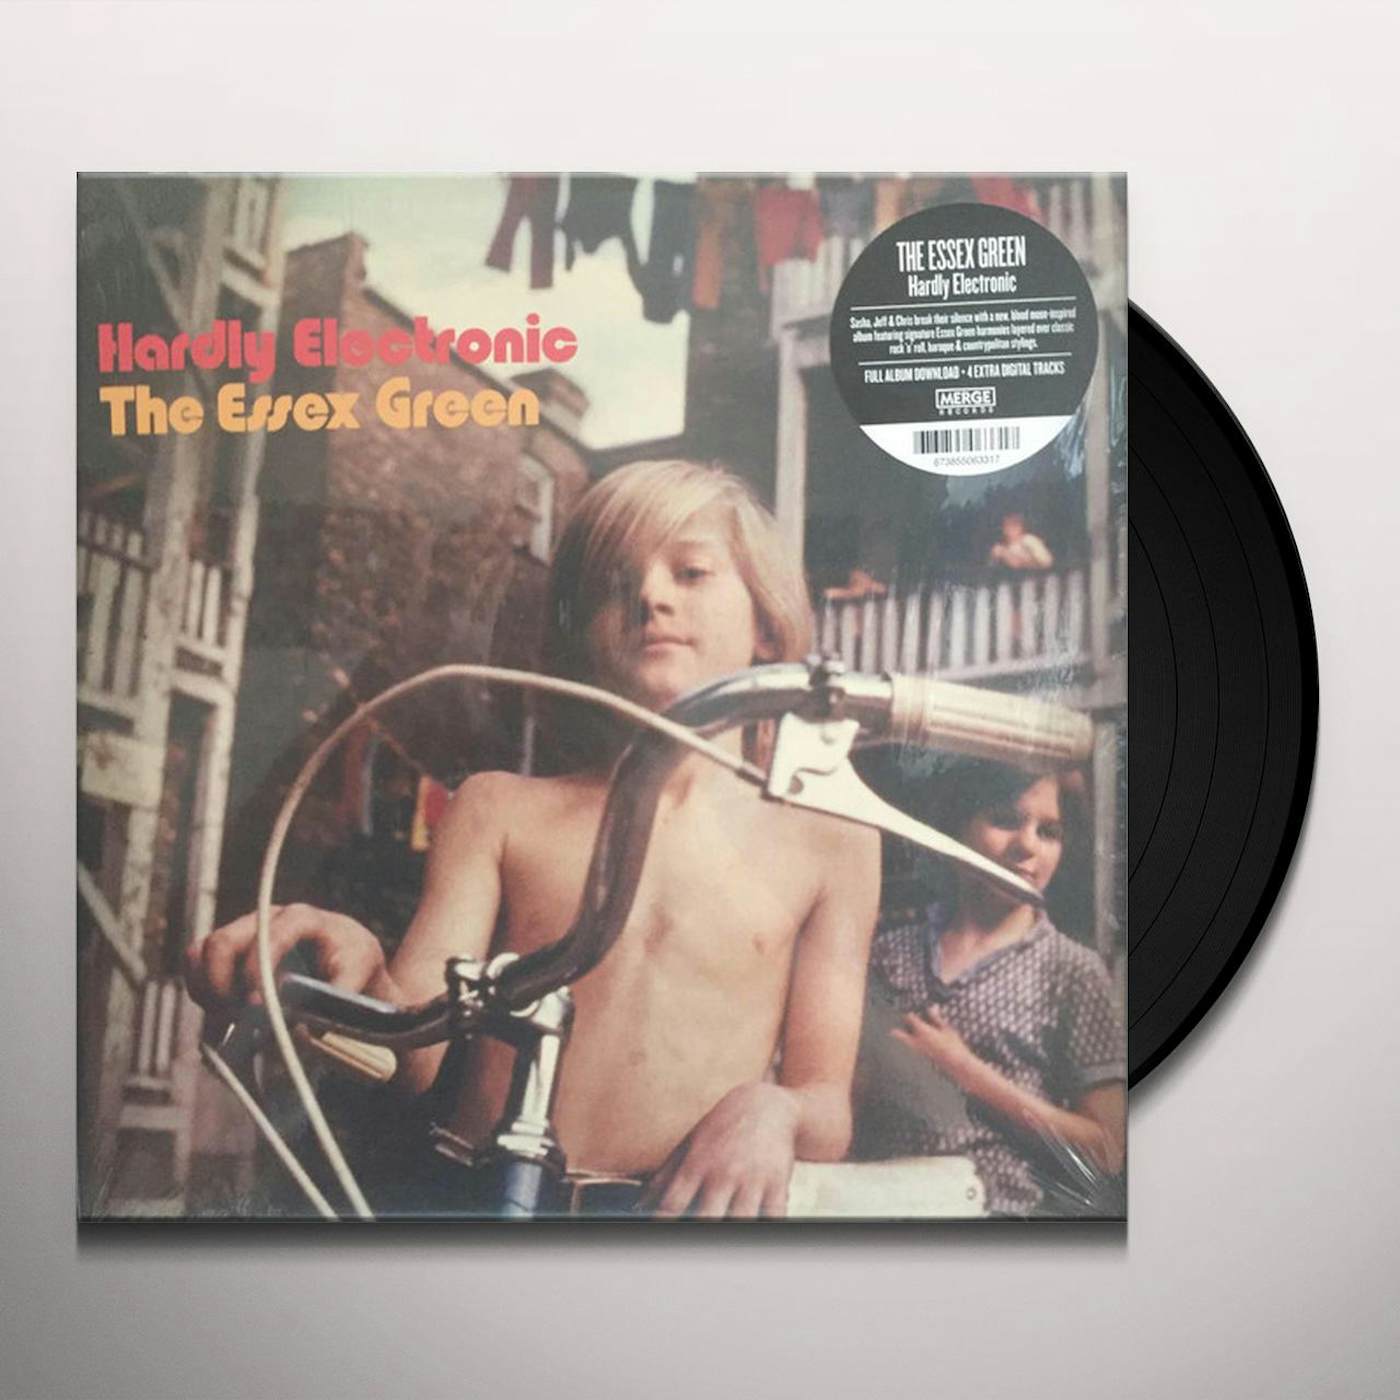 The Essex Green Hardly Electronic Vinyl Record